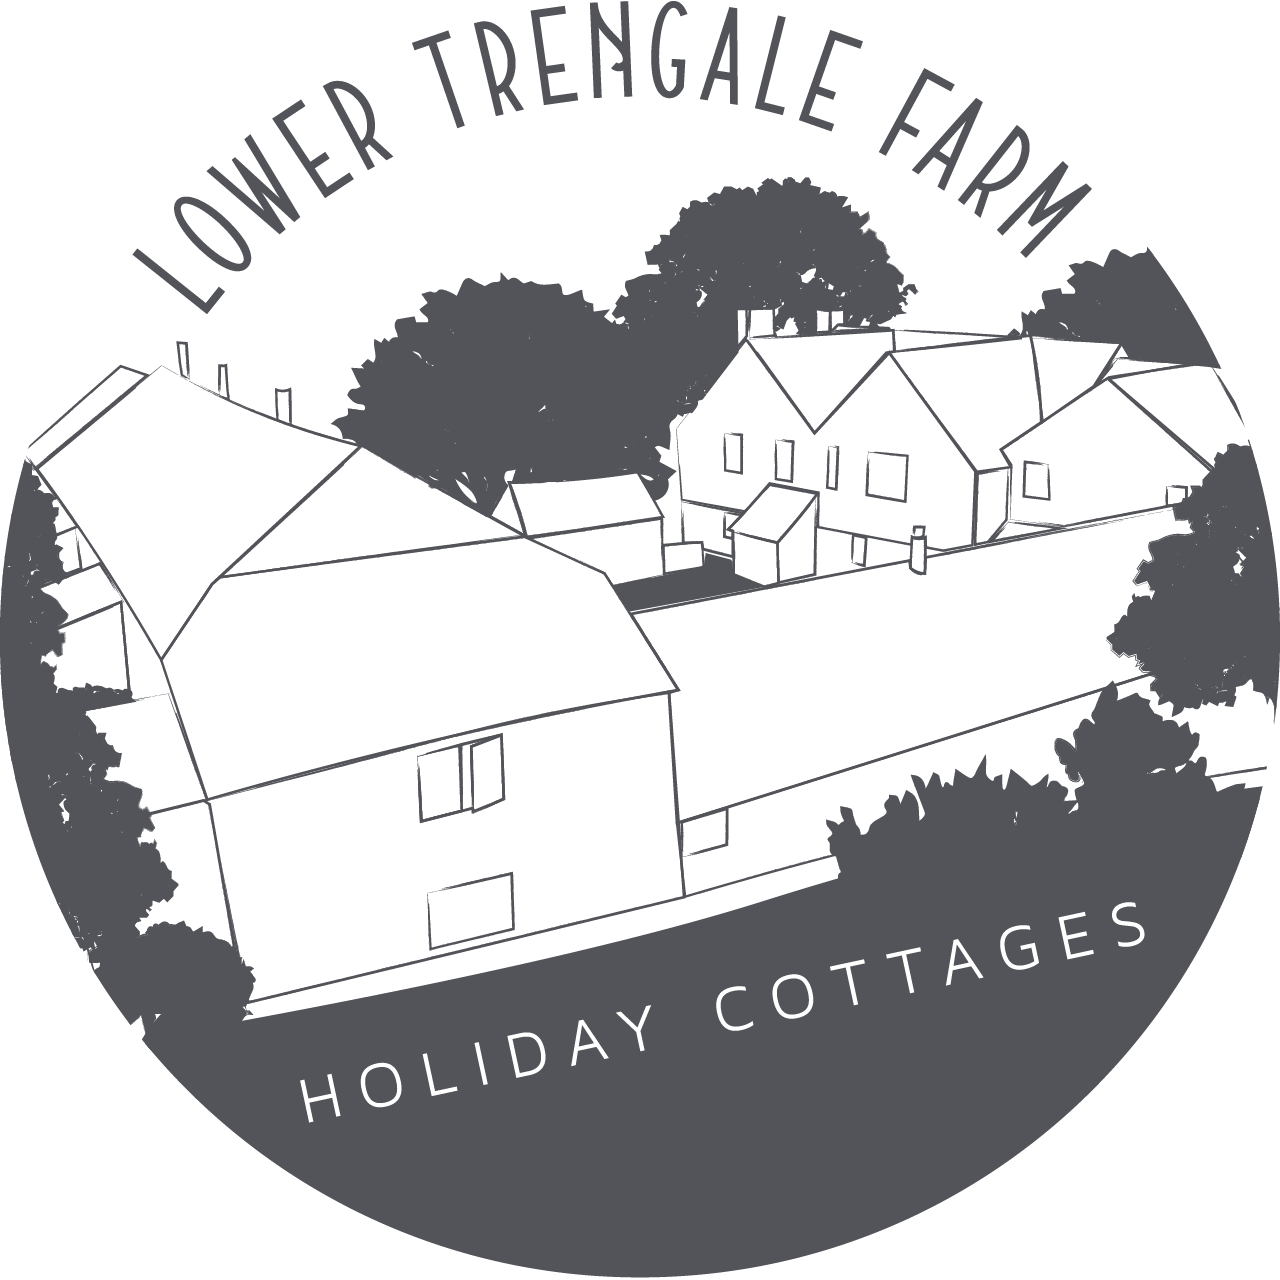 Lower Trengale Farm Holiday Cottages